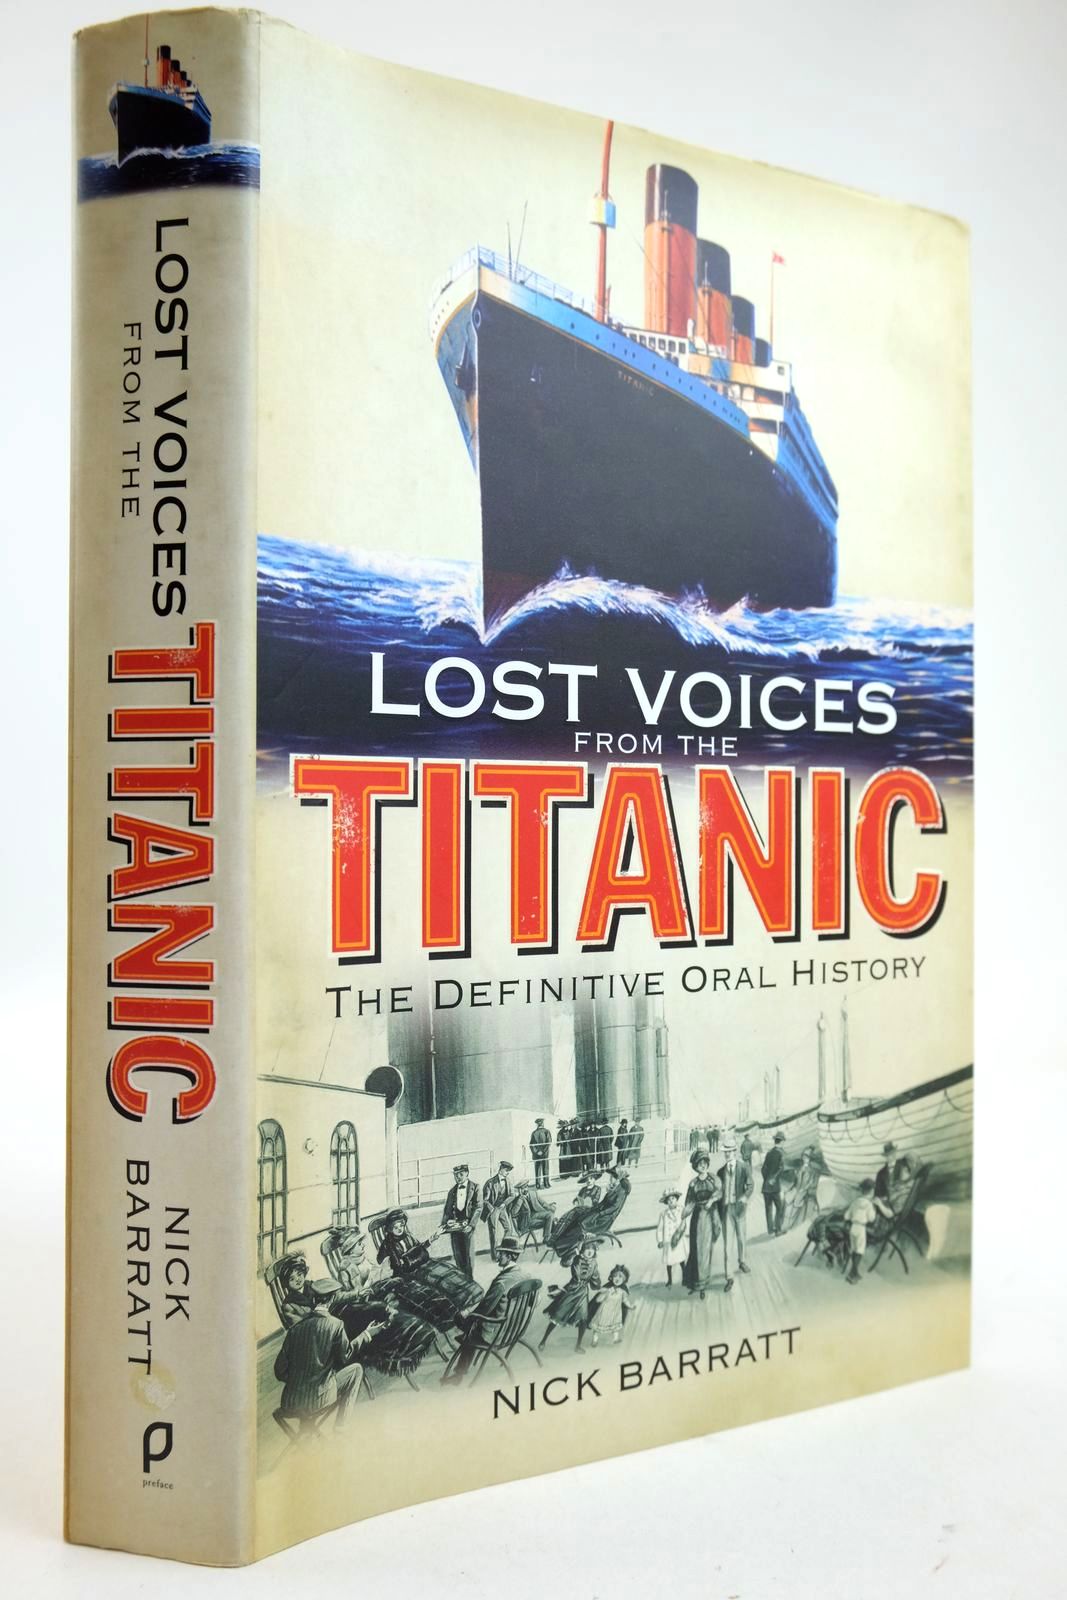 Photo of LOST VOICES FROM THE TITANIC THE DEFINITIVE ORAL HISTORY written by Barratt, Nick published by Preface (STOCK CODE: 2132881)  for sale by Stella & Rose's Books